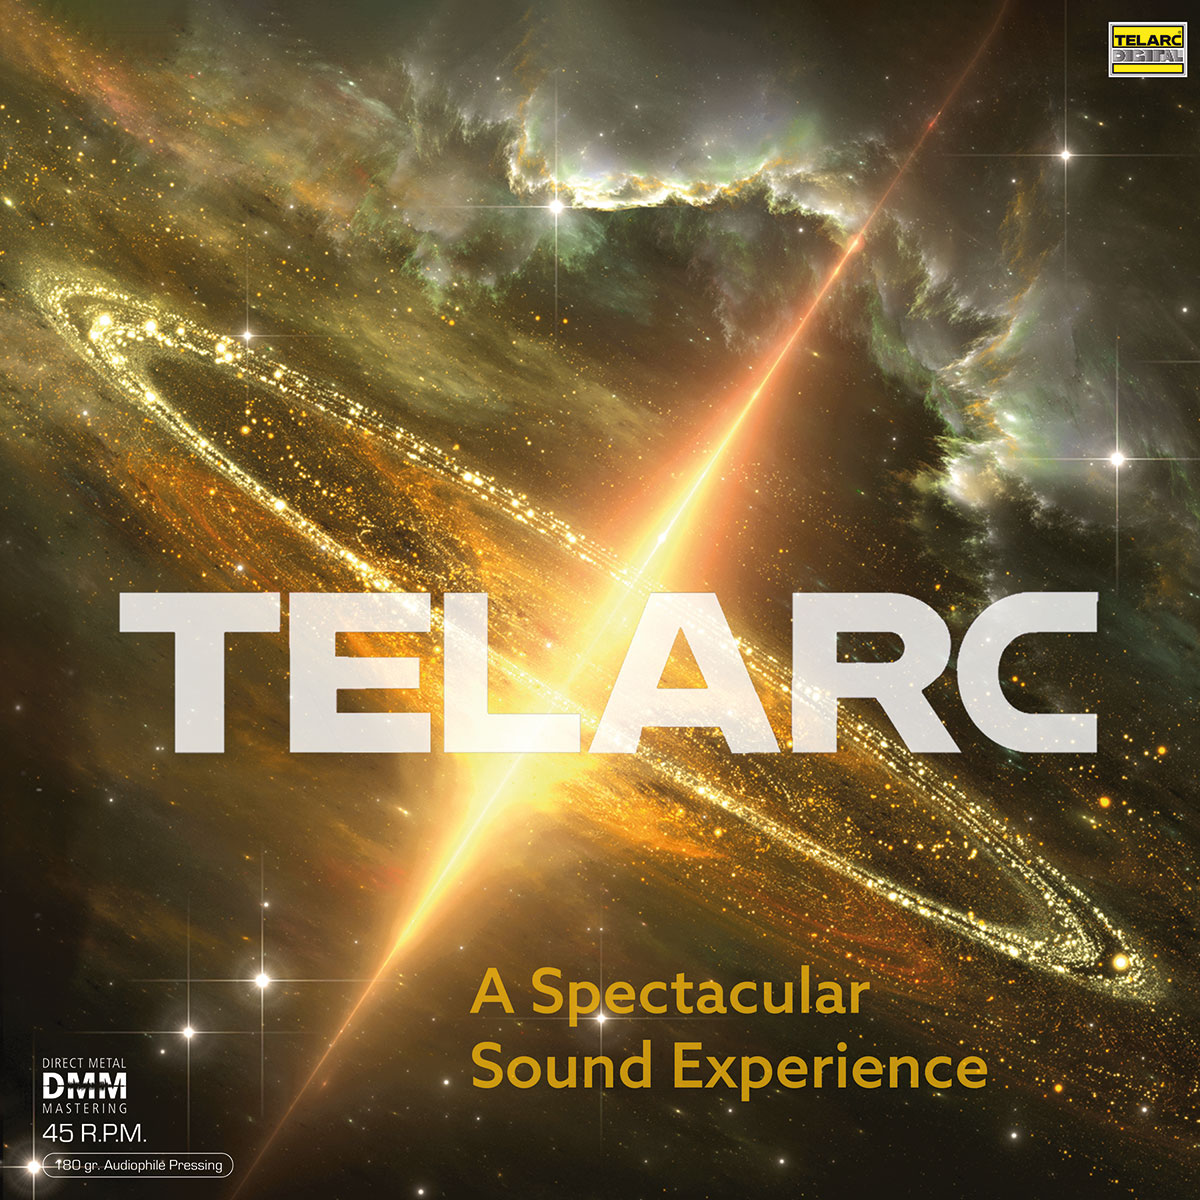 A Spectacular Sound Experience